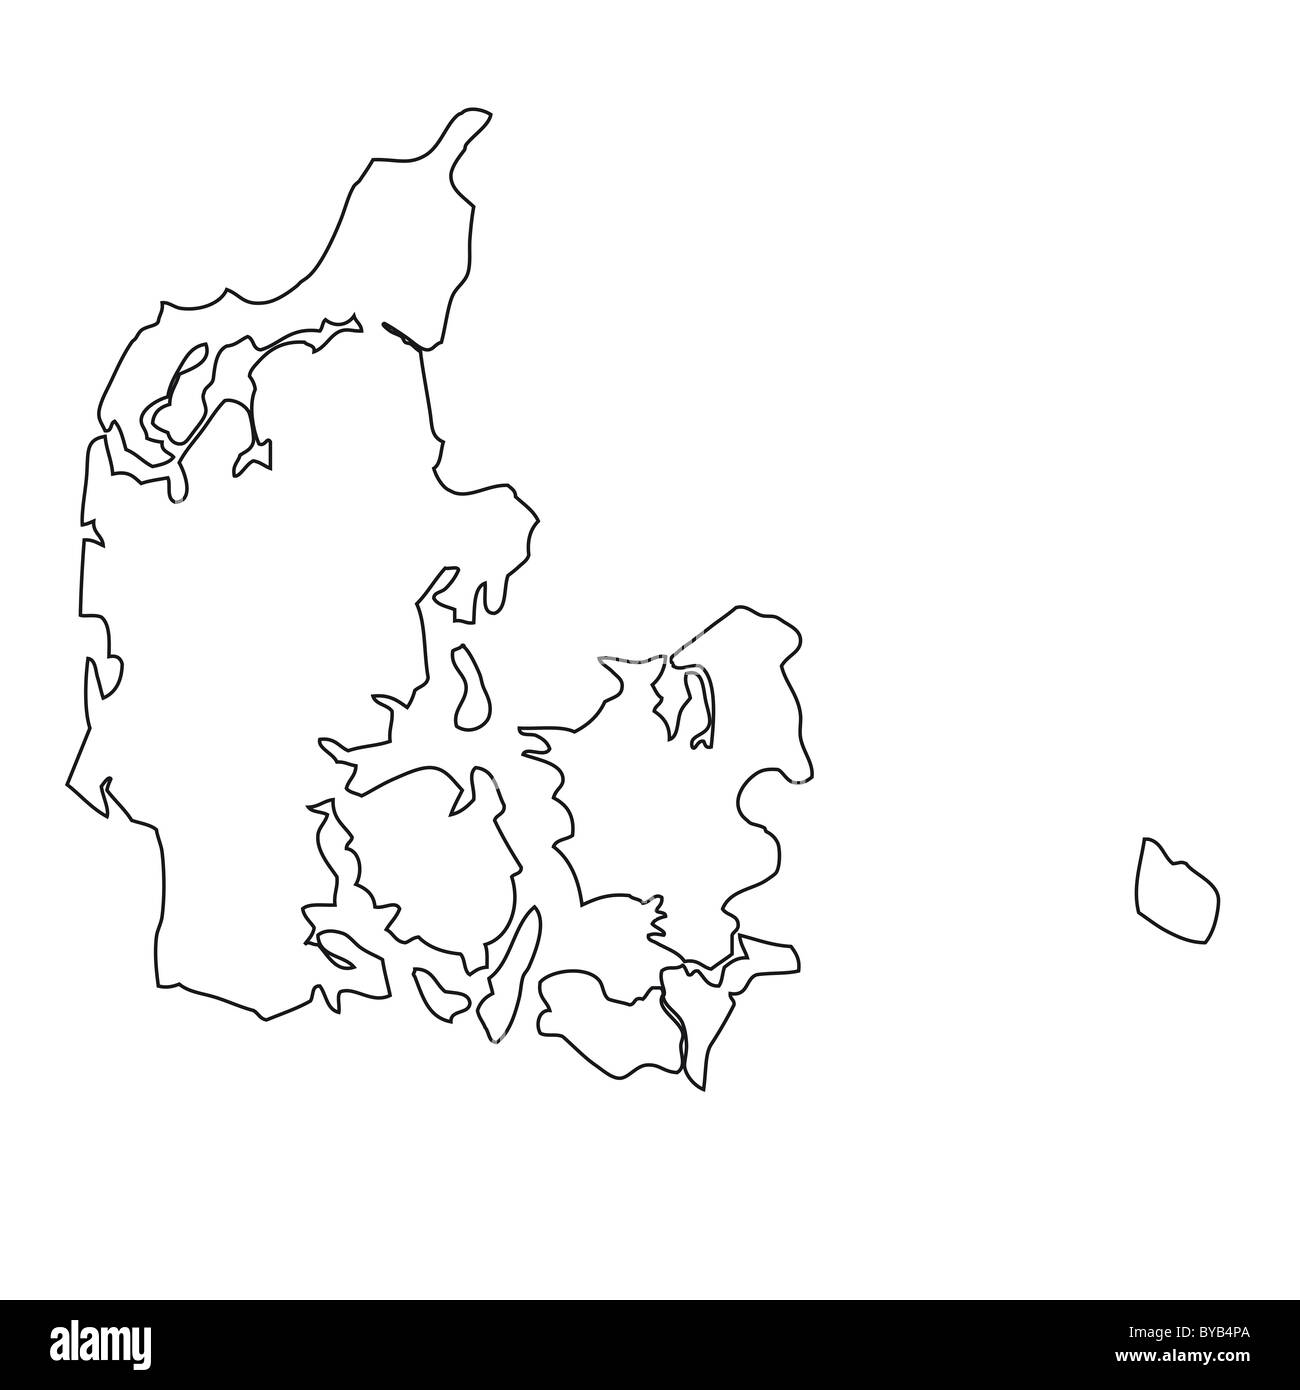 Maps of denmark Black and White Stock Photos & Images - Alamy